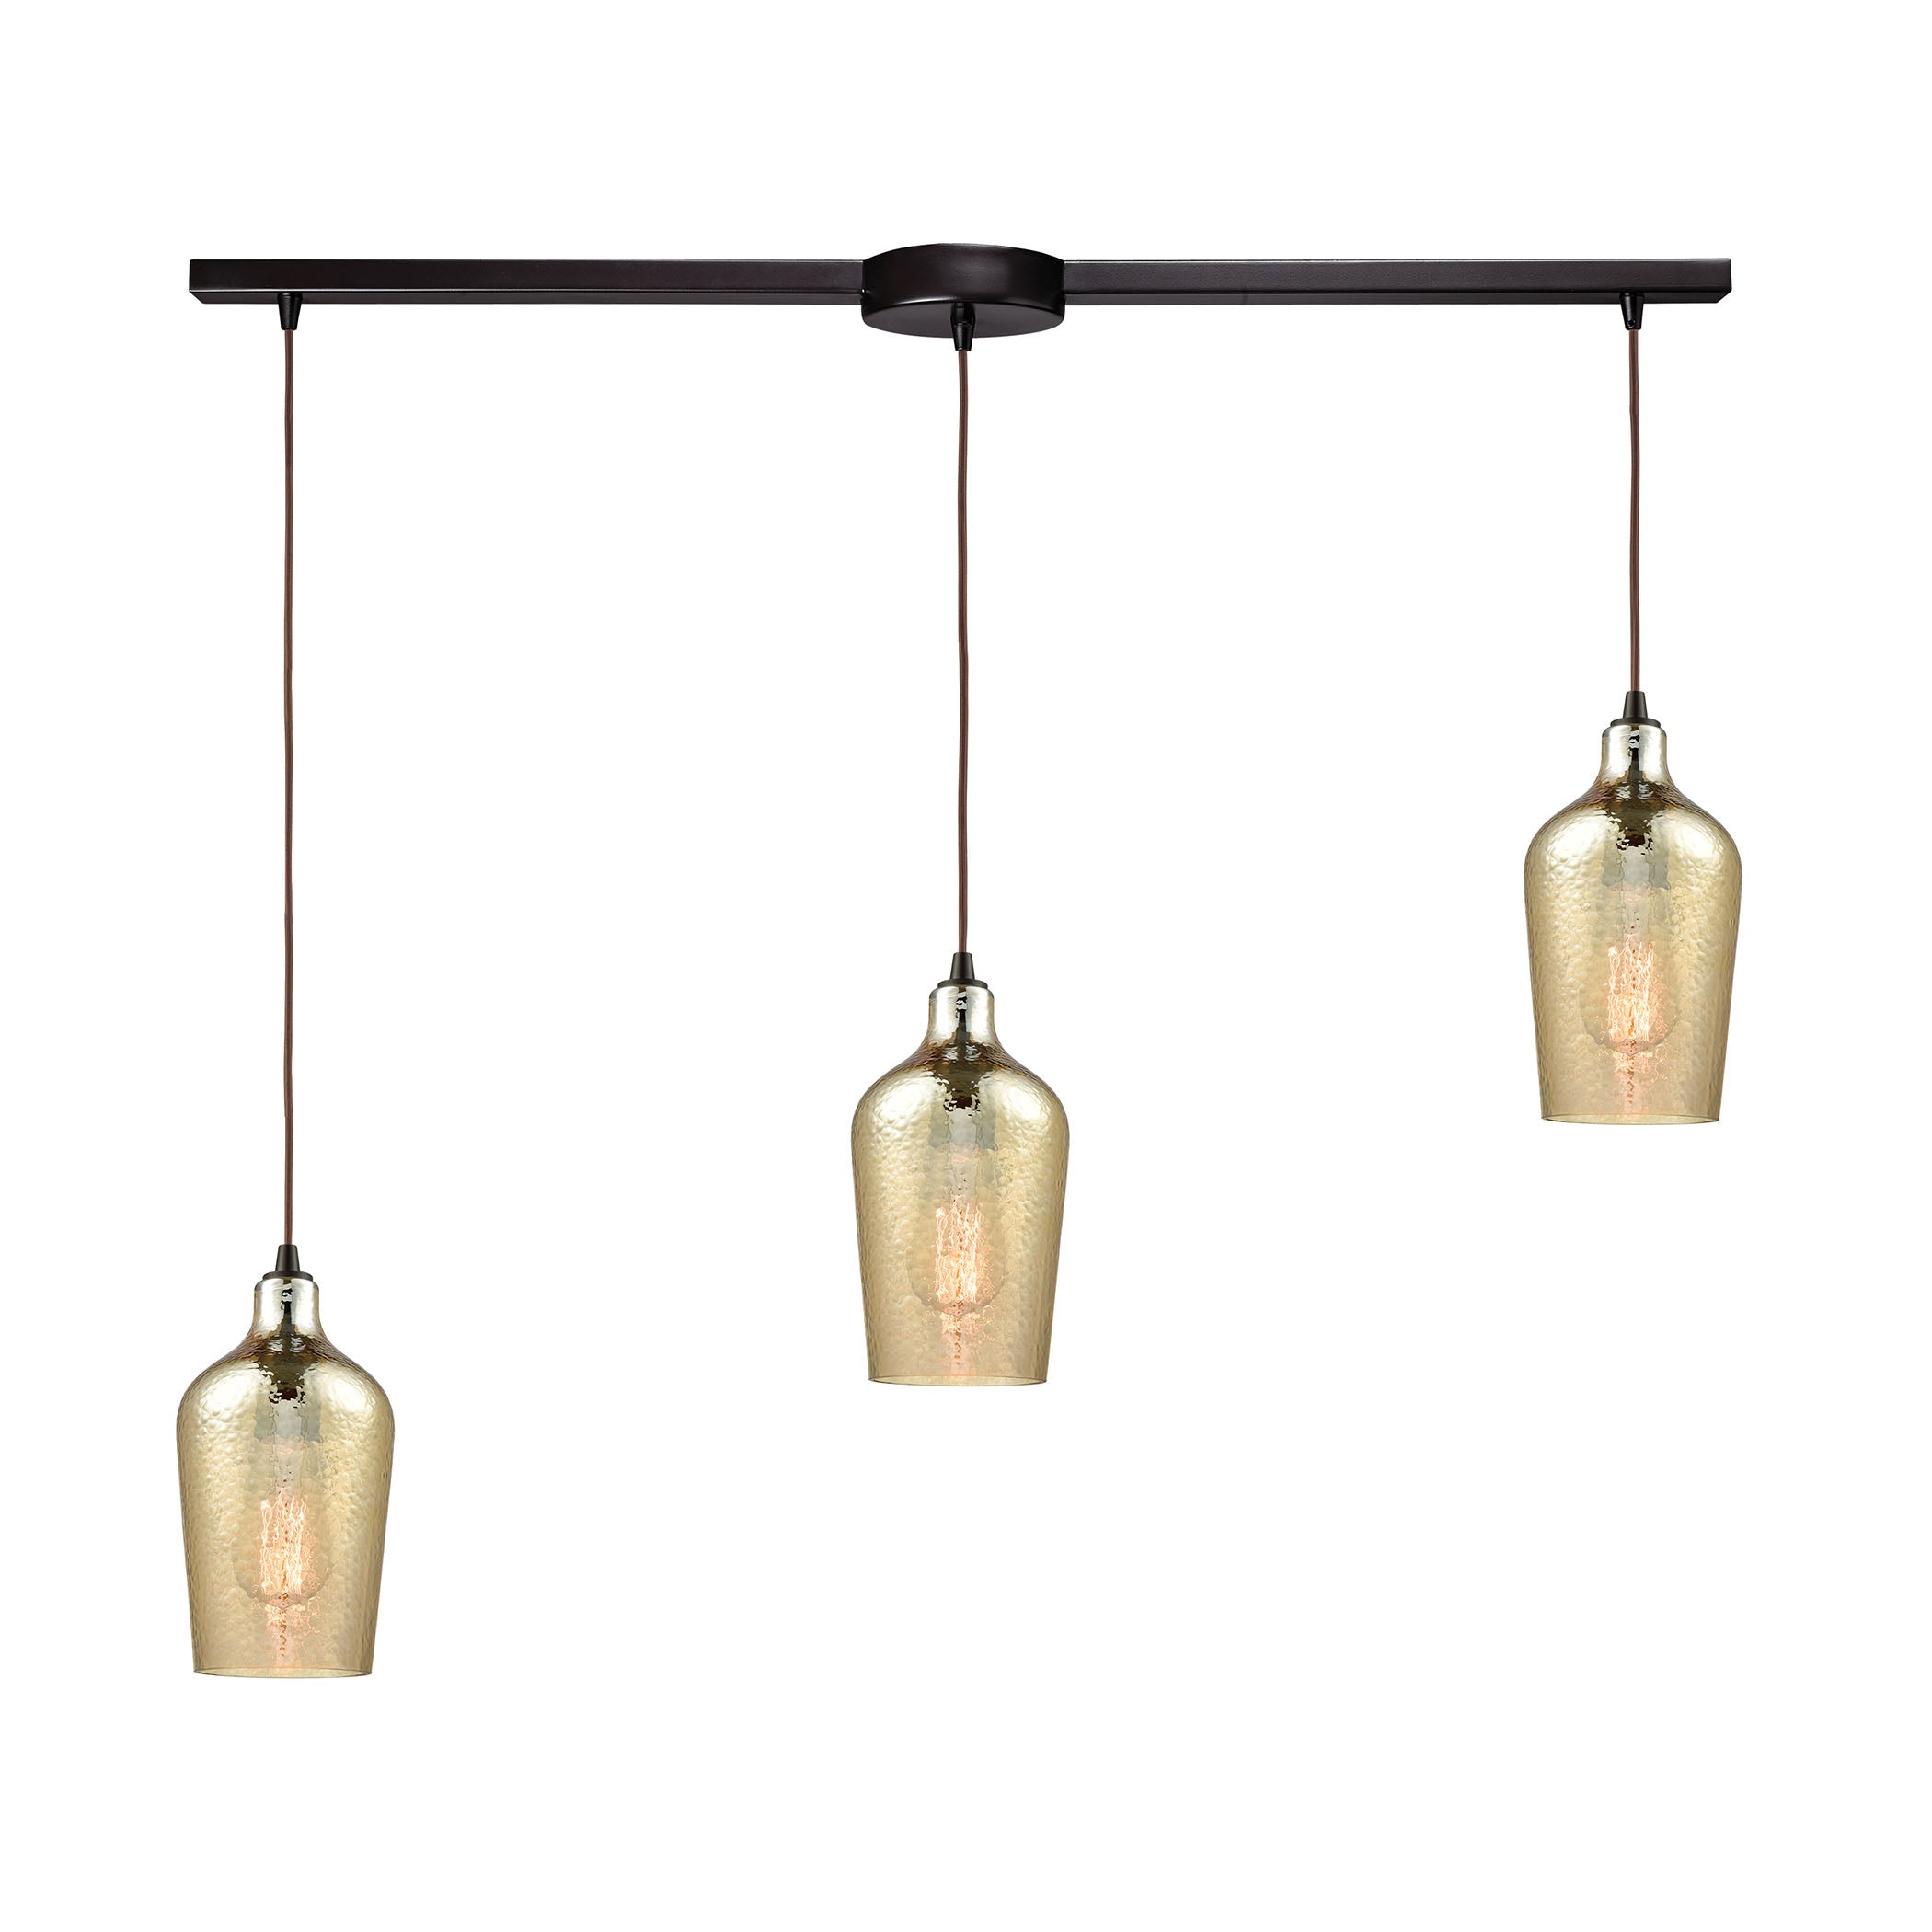 ELK Lighting 10840/3L Hammered Glass 3-Light Linear Mini Pendant Fixture in Oiled Bronze with Amber-plated Hammered Glass